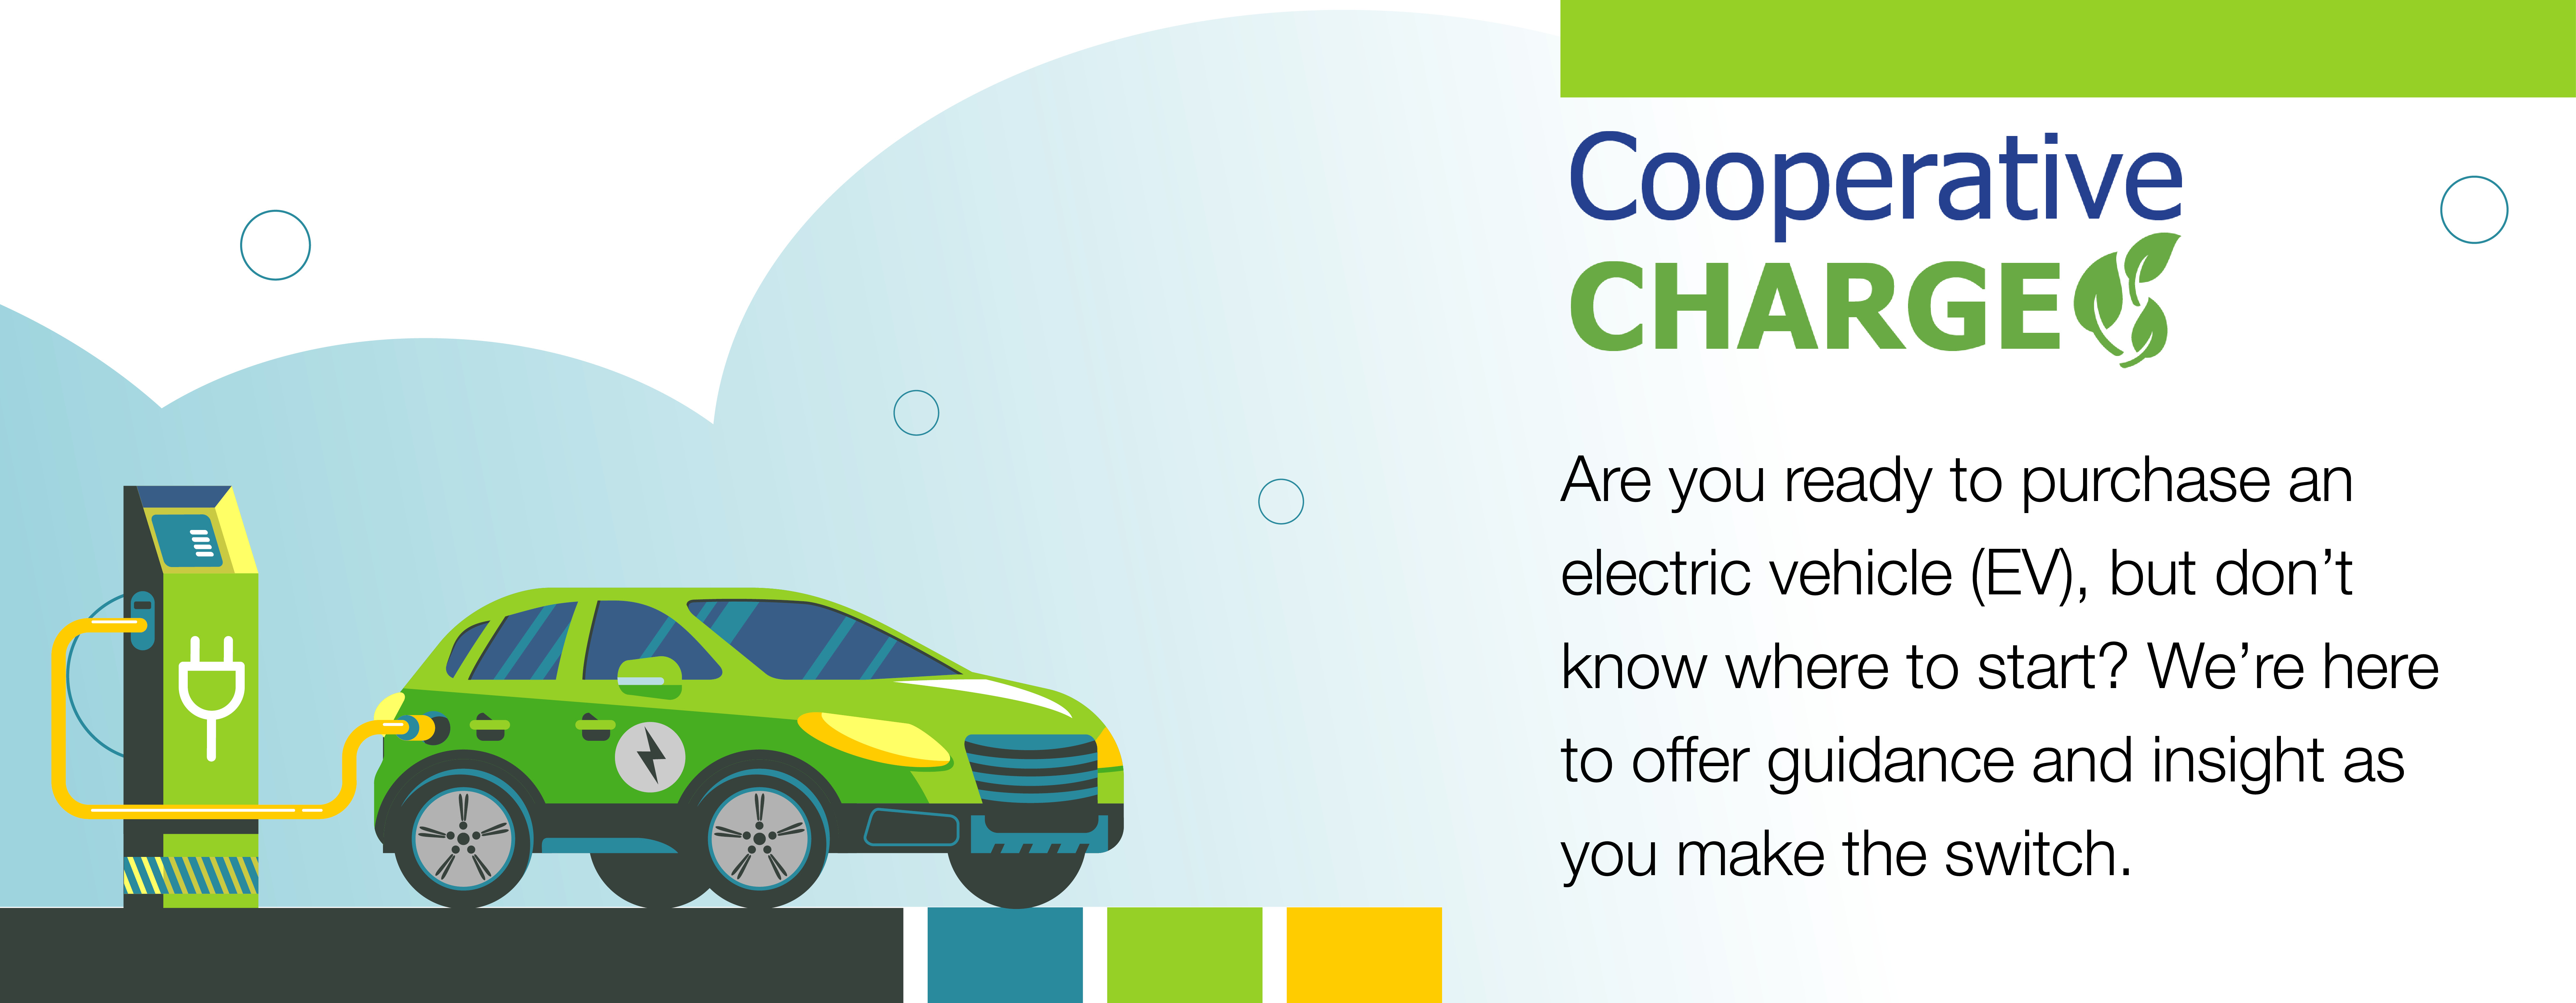 Cooperative Charge Residential EV Charger Rebate program